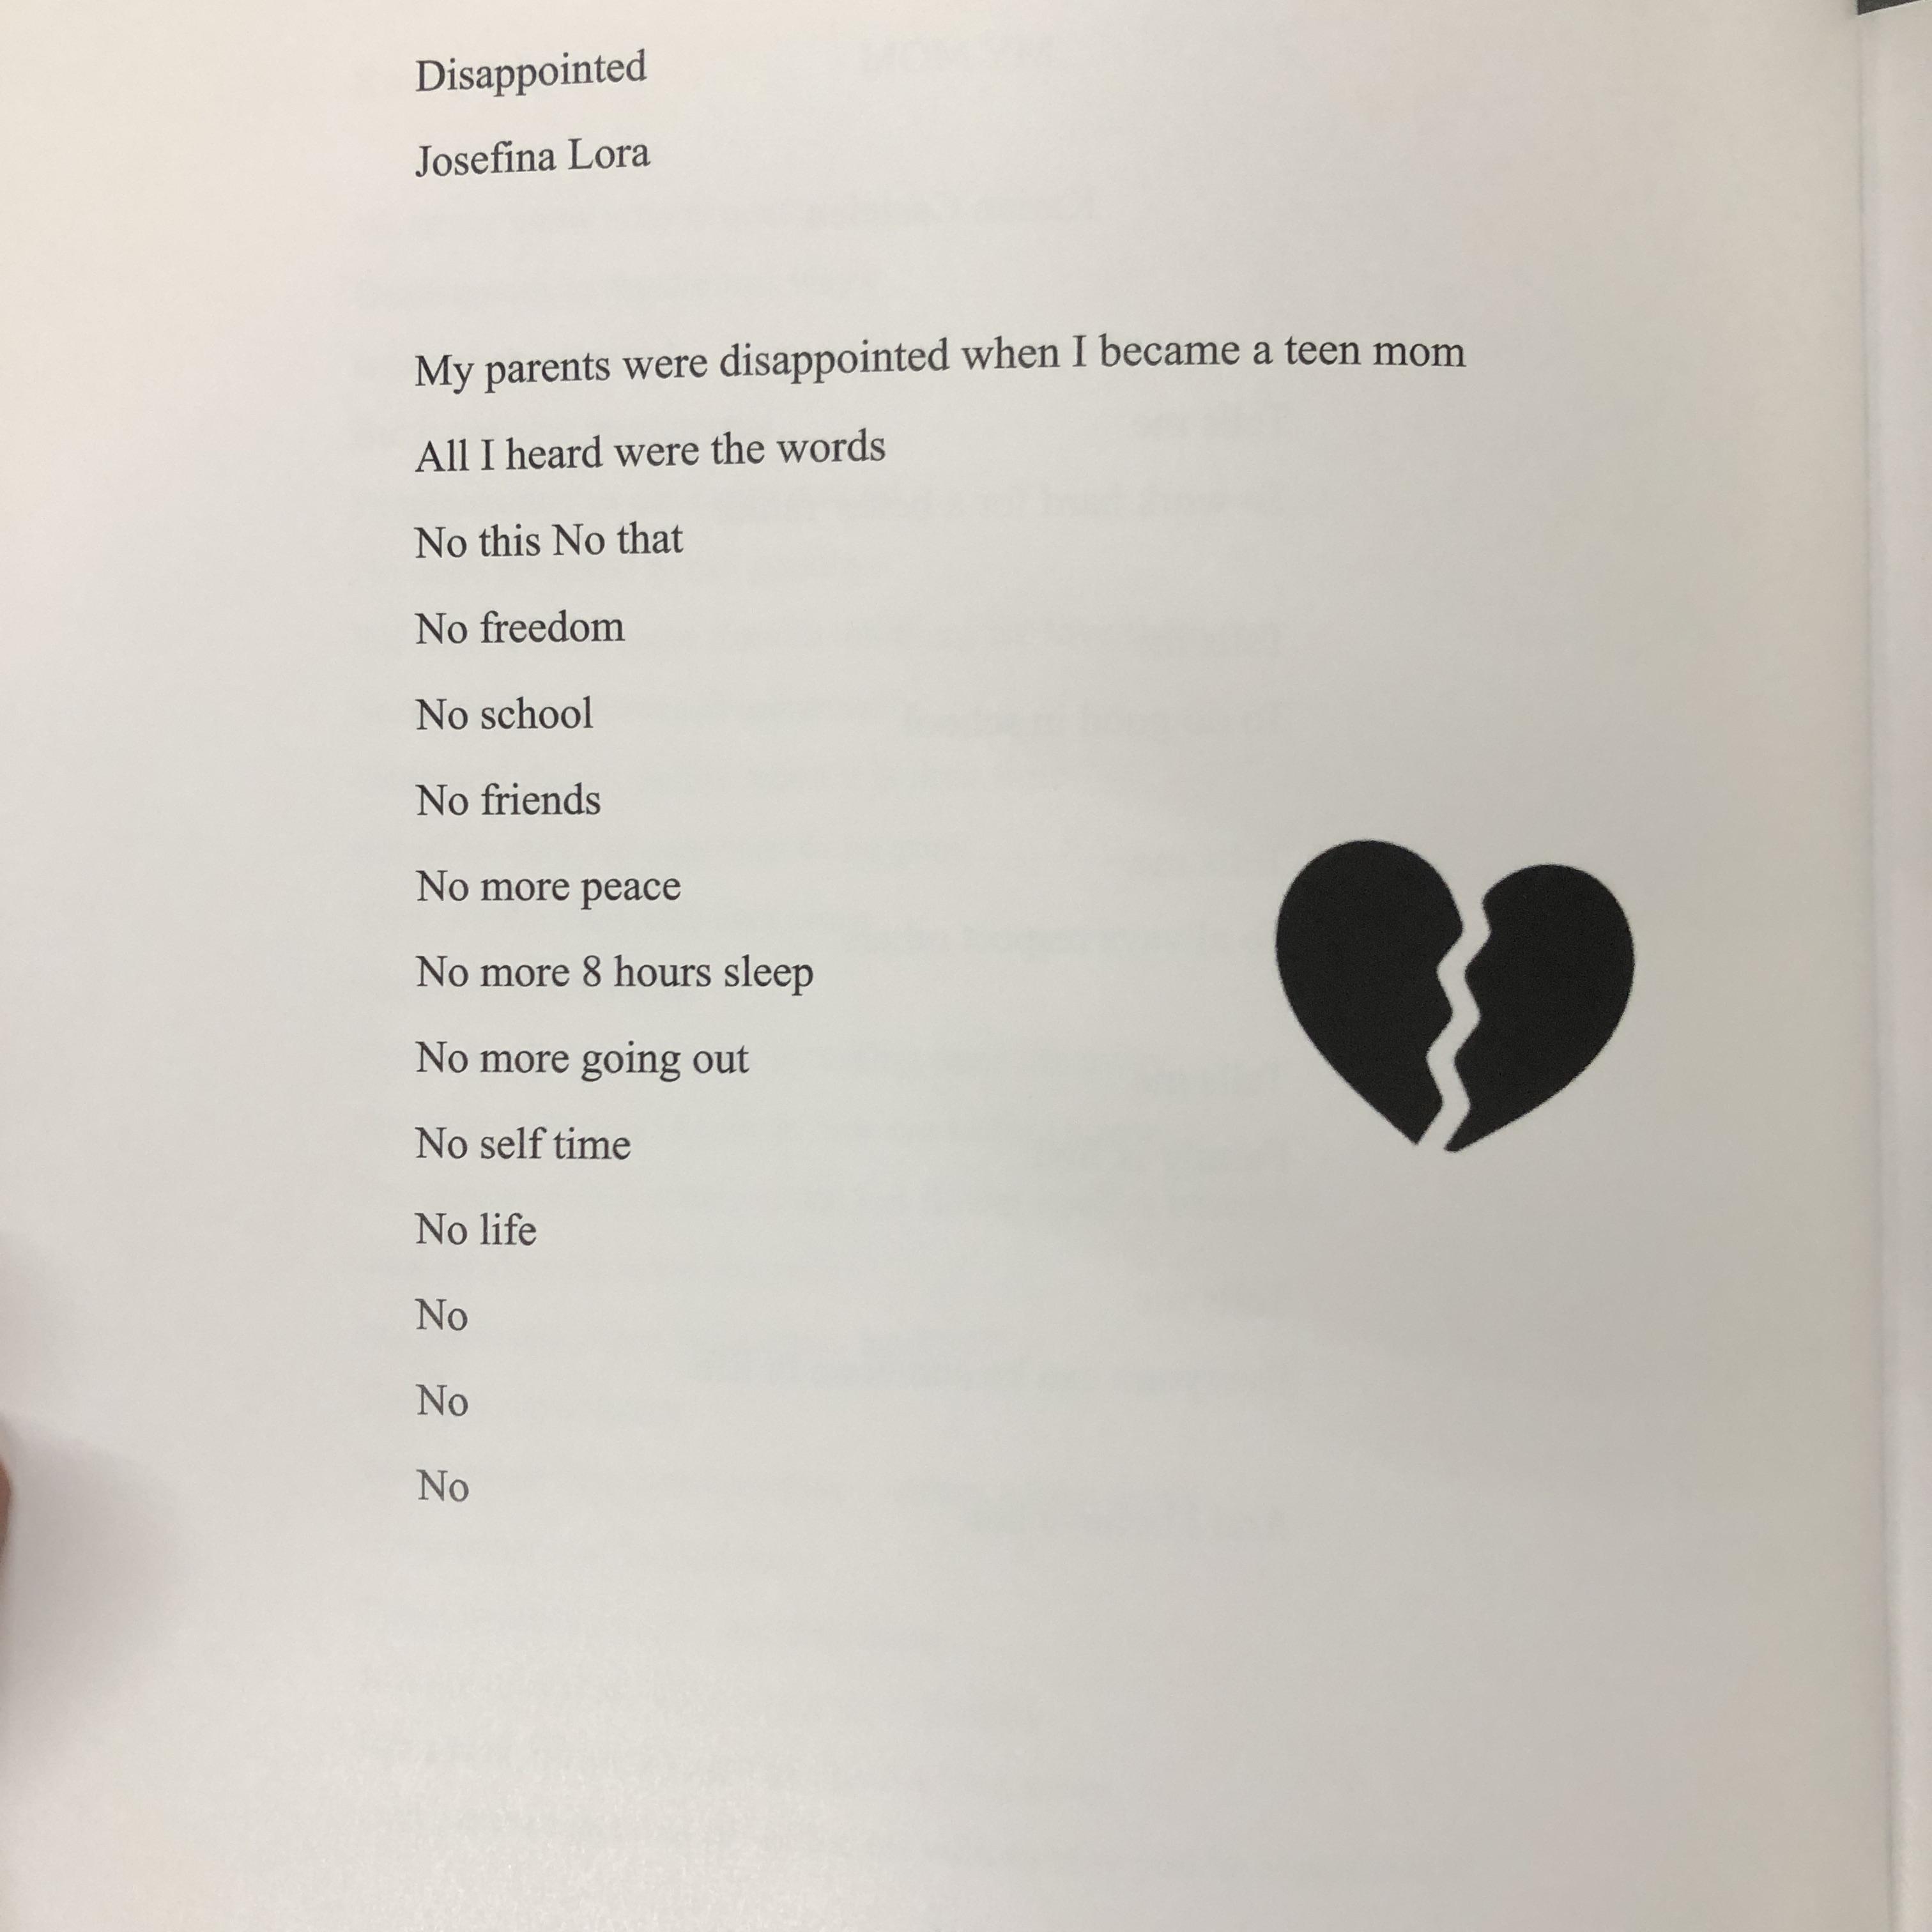 a poem titled "Disappointed" by student Josefina Lara